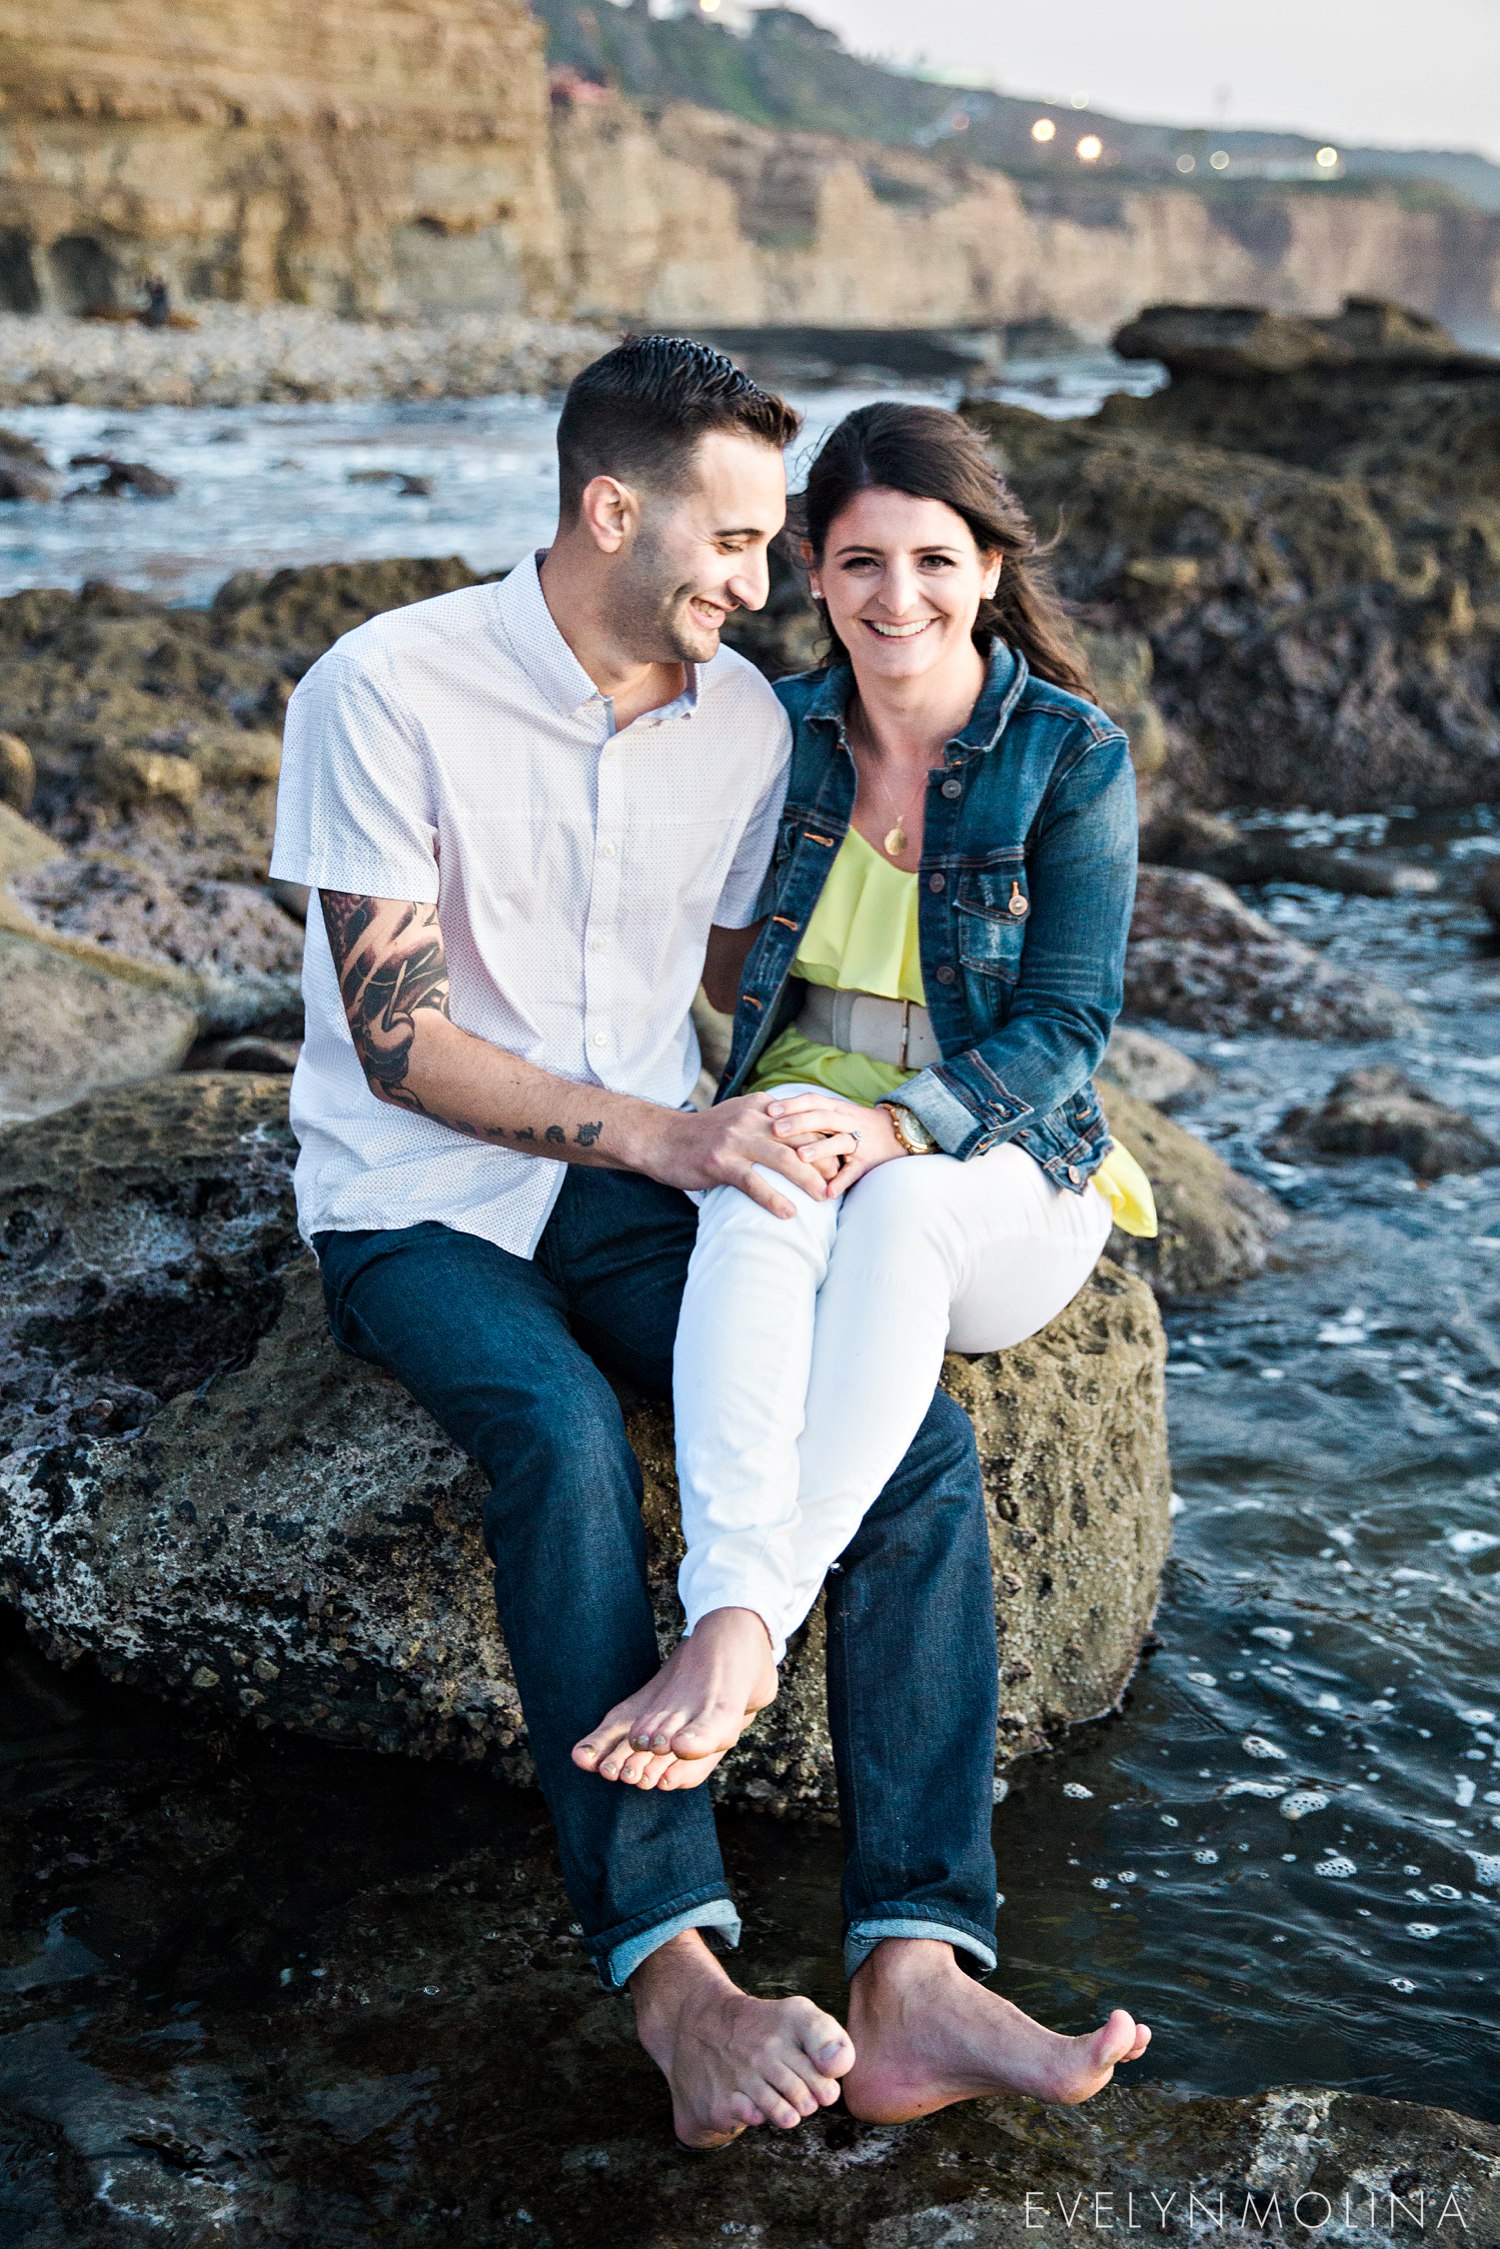 Sunset Cliffs Engagement Session - Carly and Alex - Evelyn Molina Photography_0032.jpg